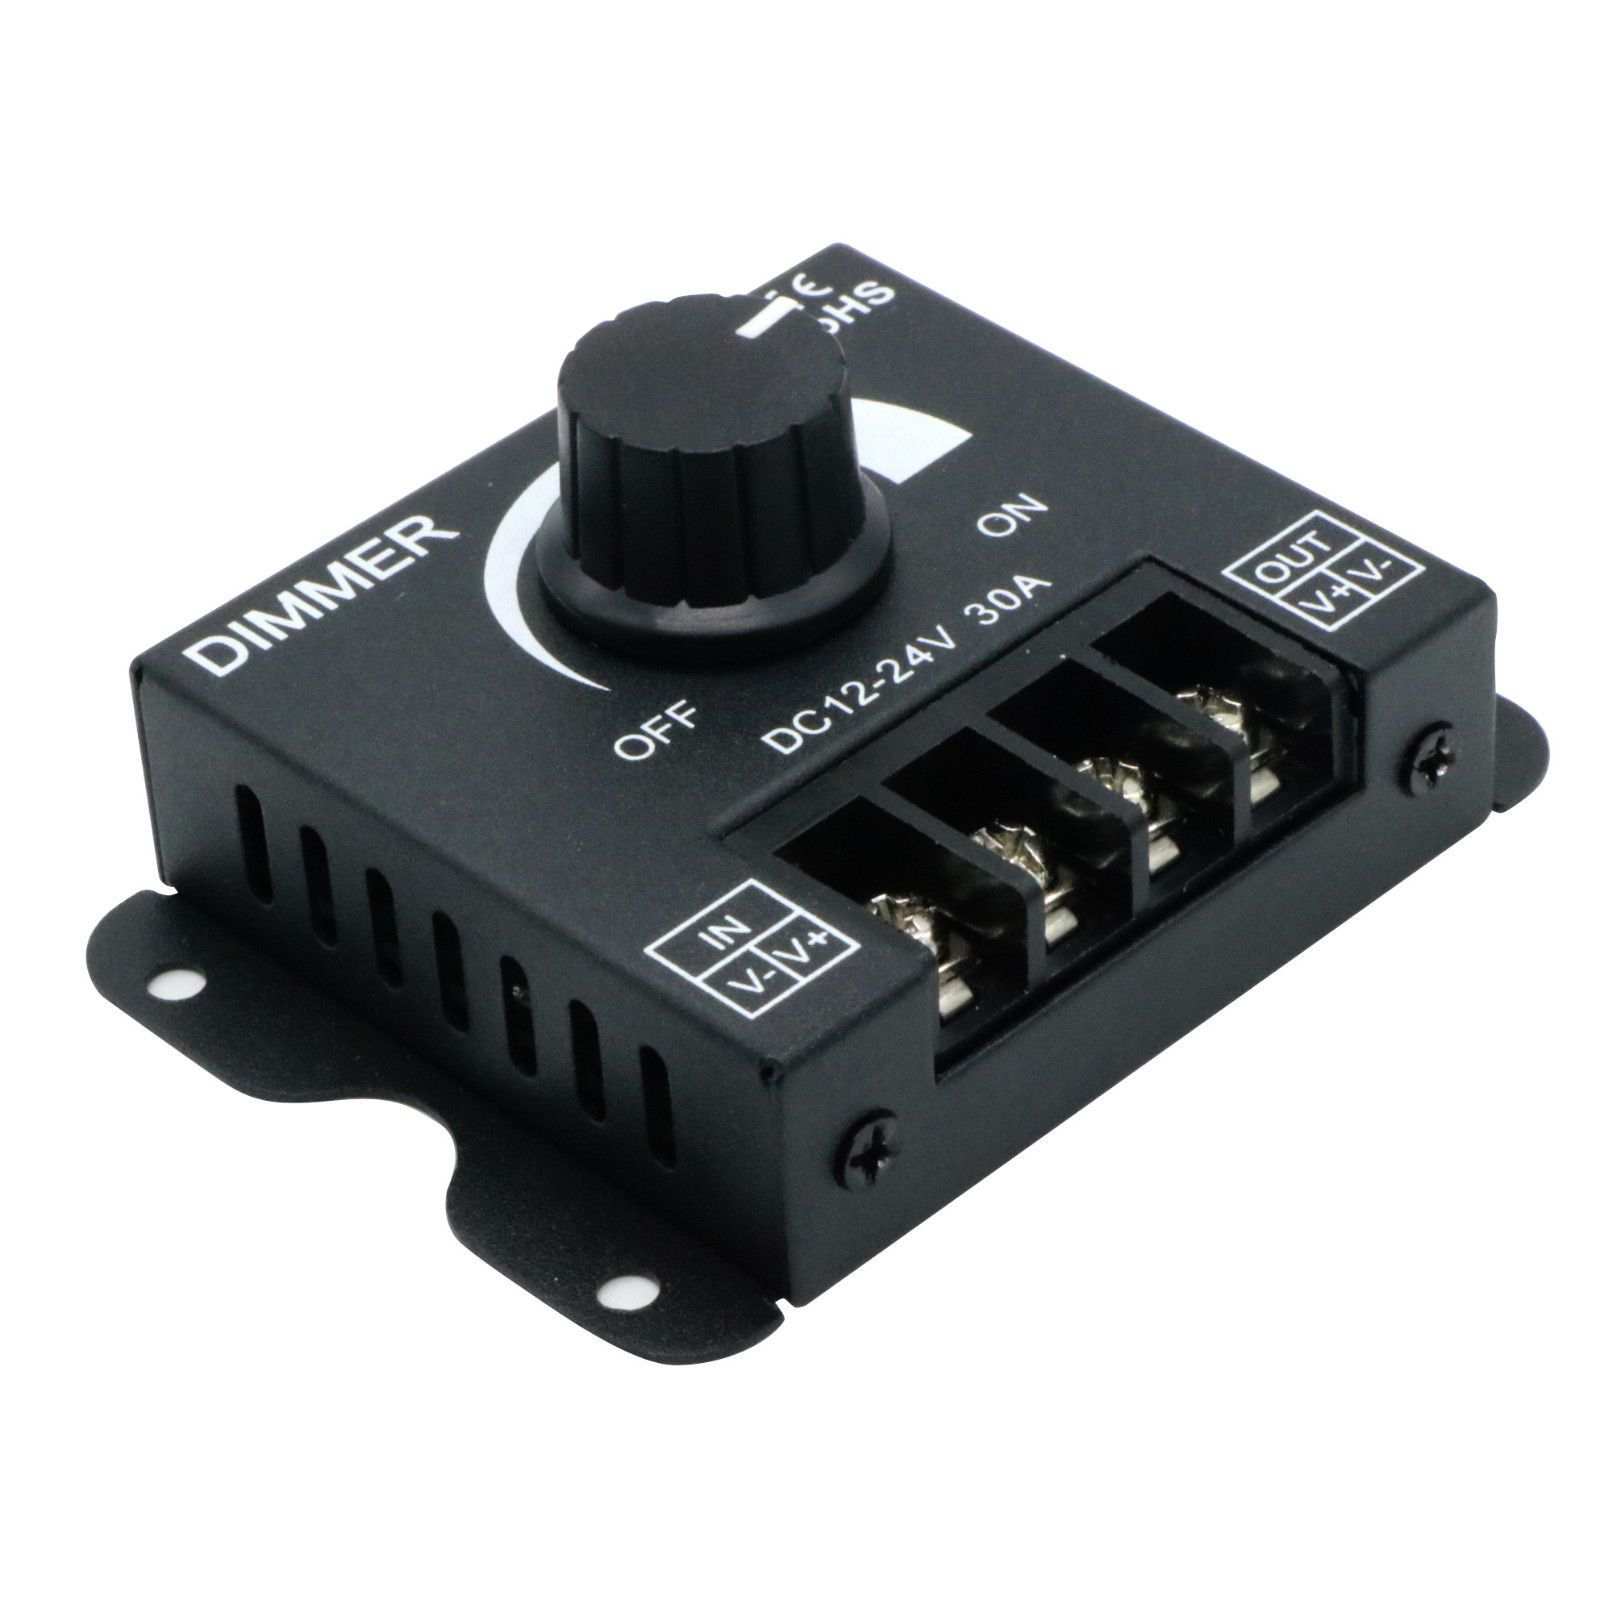 LiquidLEDs Lighting Dimmer PWM Dimming Switch for 12-24 Volt DC LED globes 12-24DIM